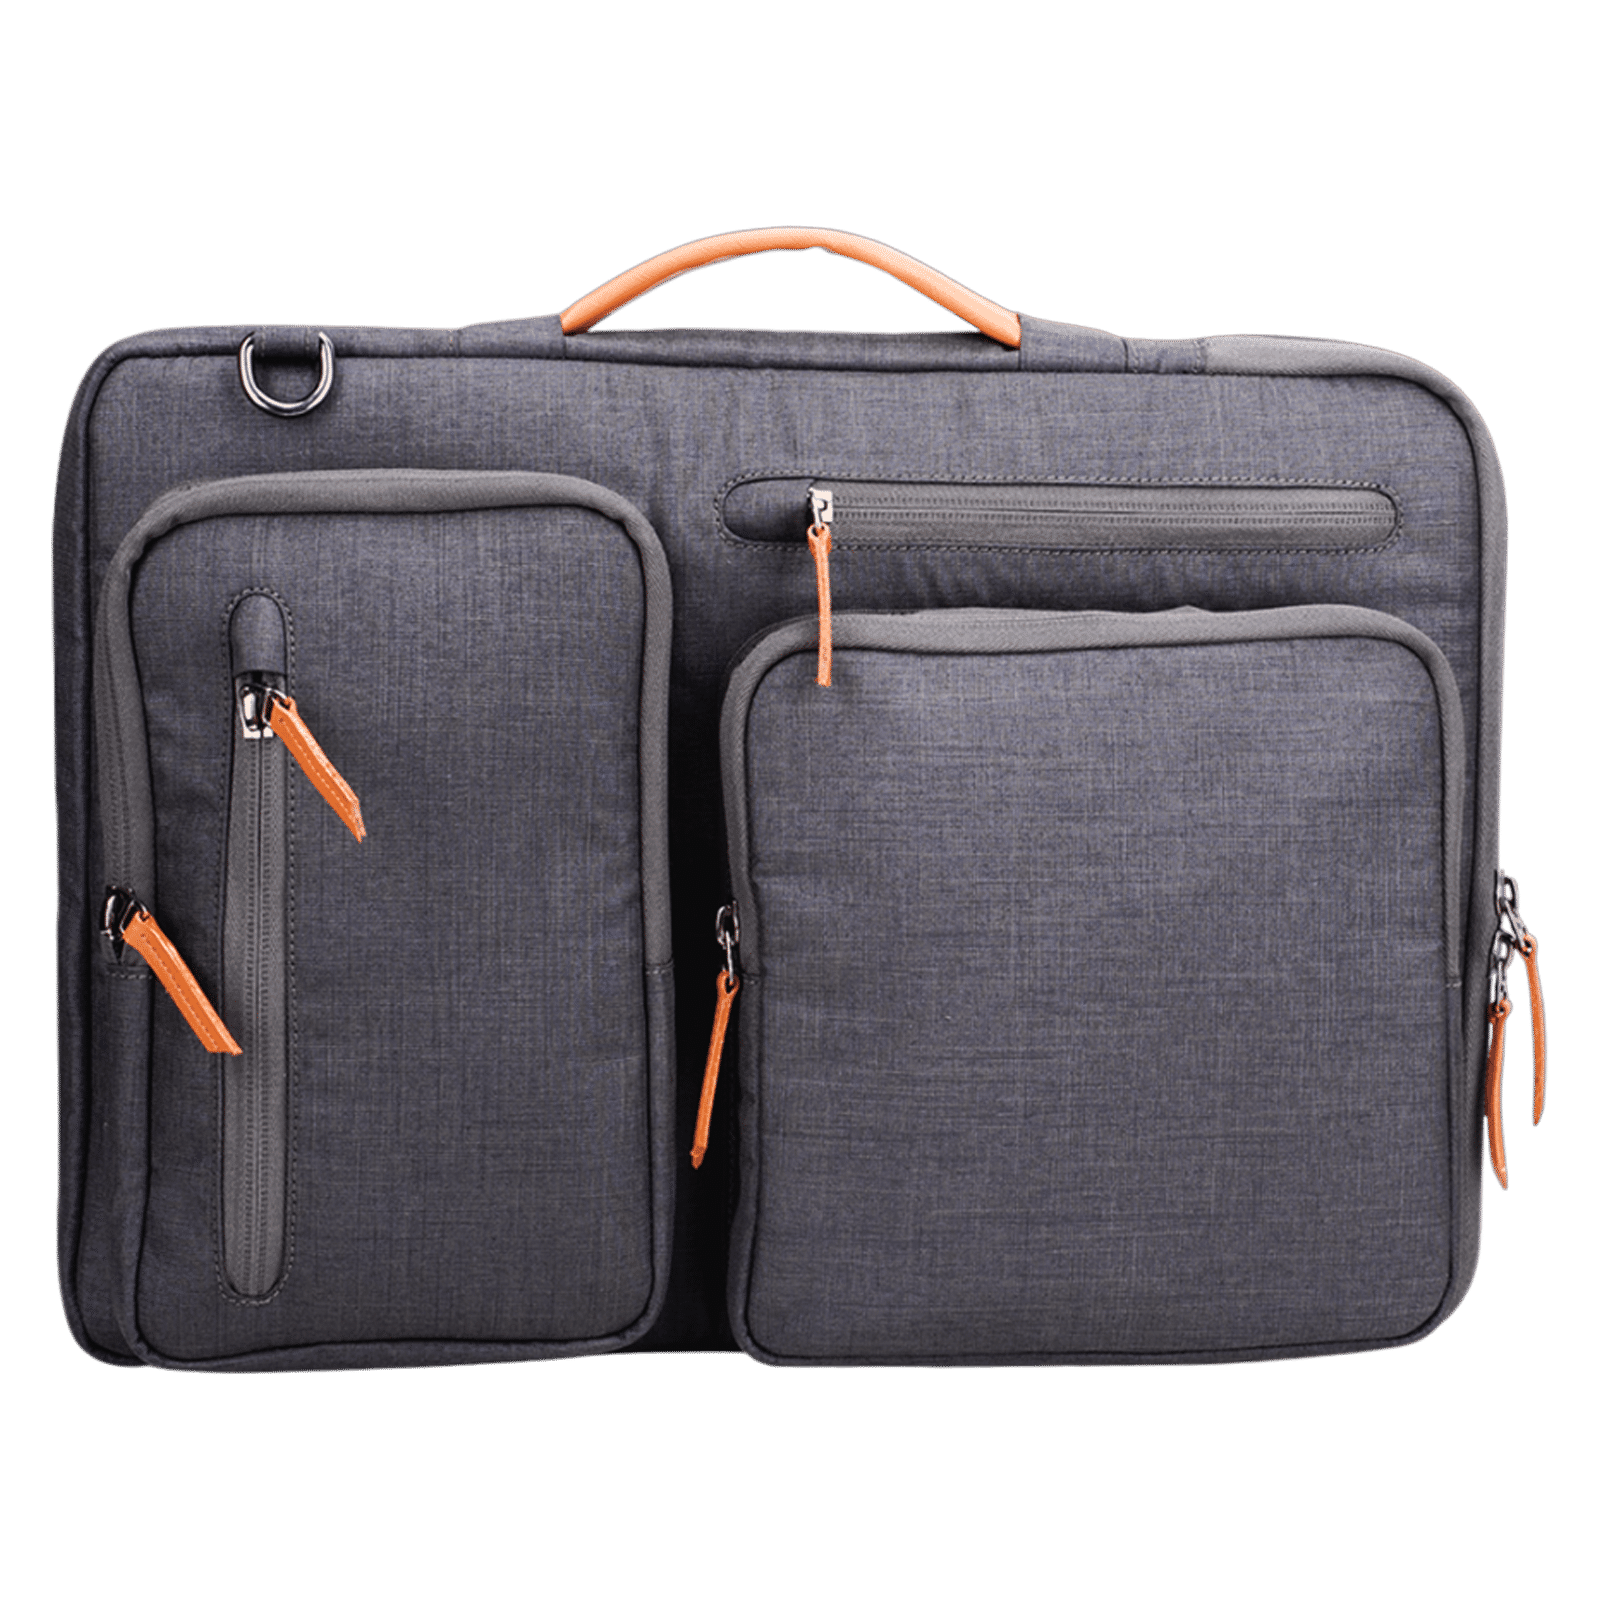 This Popular Carry-on Backpack Is Only $22 Today